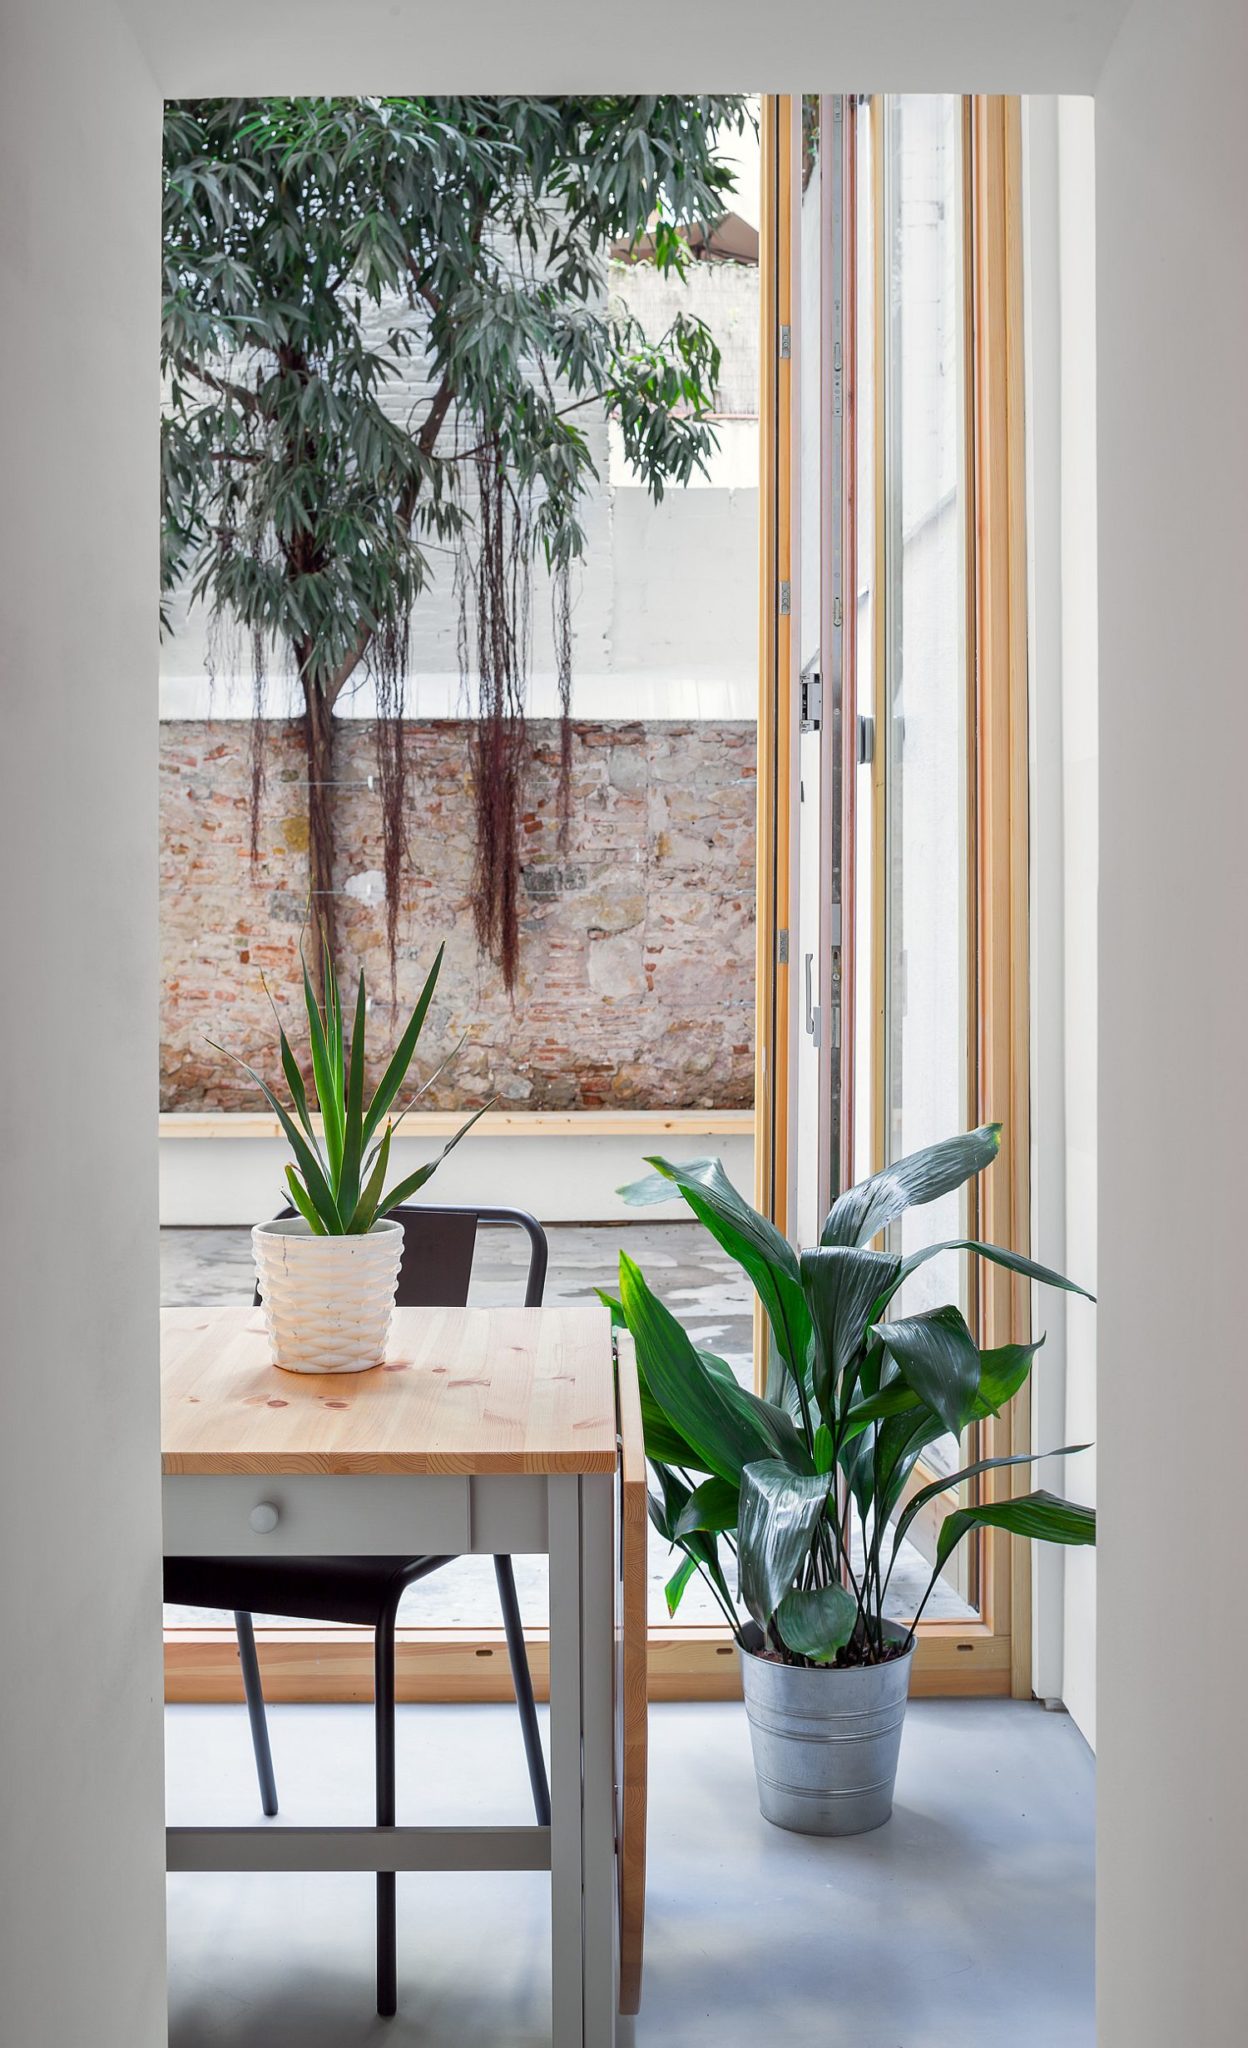 Greenery-becomes-an-integral-part-of-the-neutral-interior